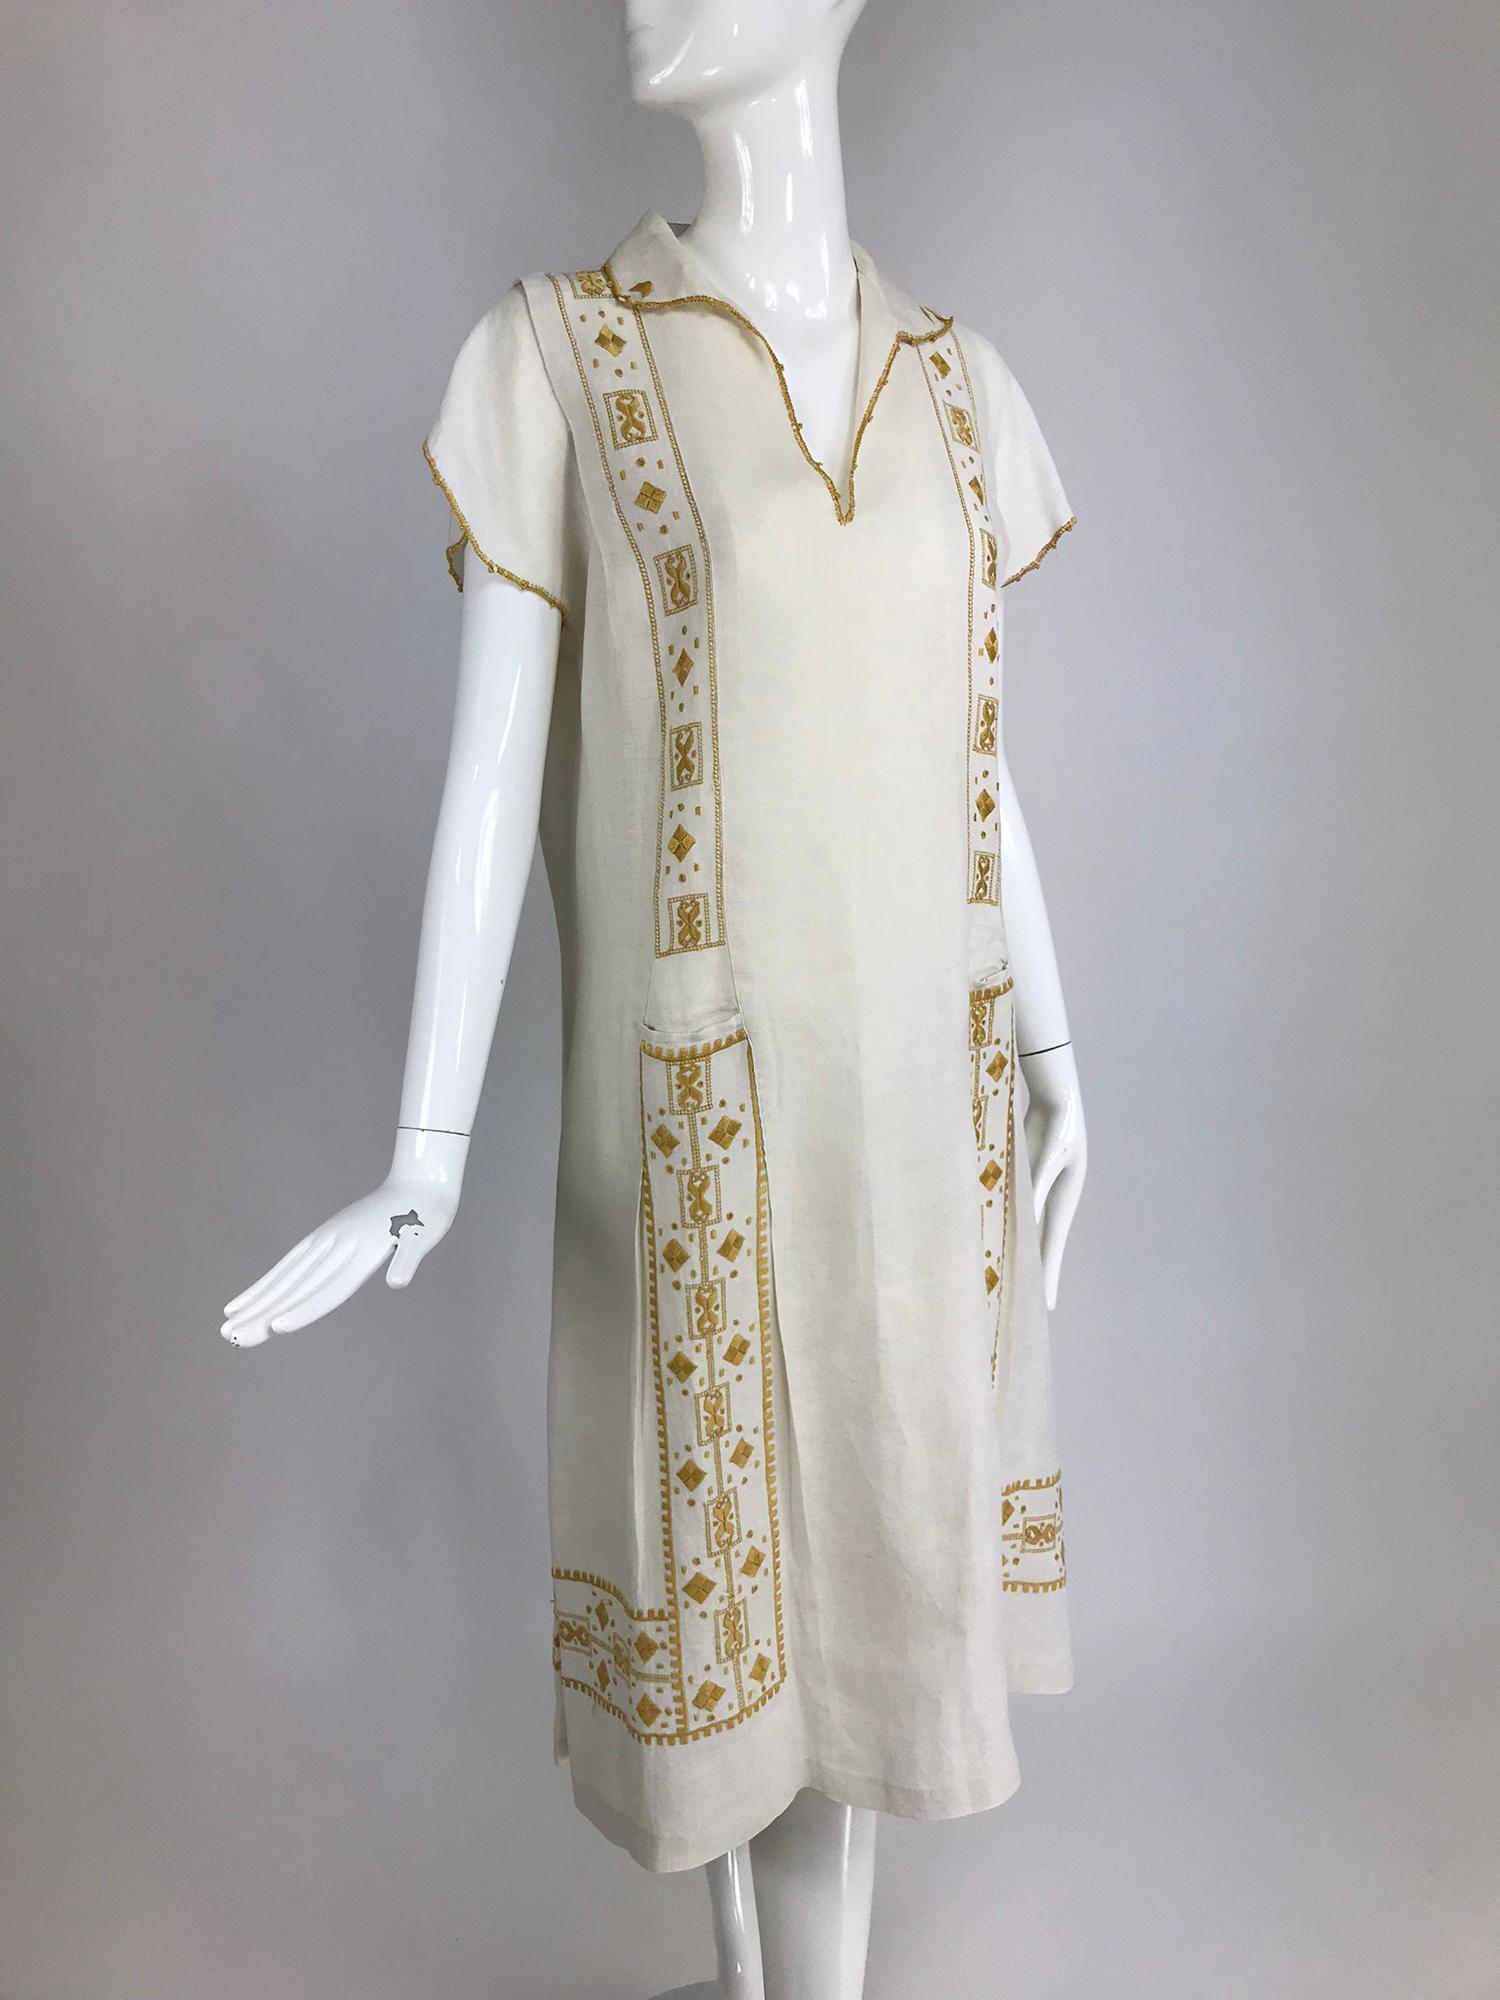 Vintage 1920s Hand embroidered Arts and Crafts linen day dress.The Arts and Crafts Movement of the early 20th century was a philosophy and way of life that encompassed all aspects of living, including home furnishings, publishing, and fashion. This